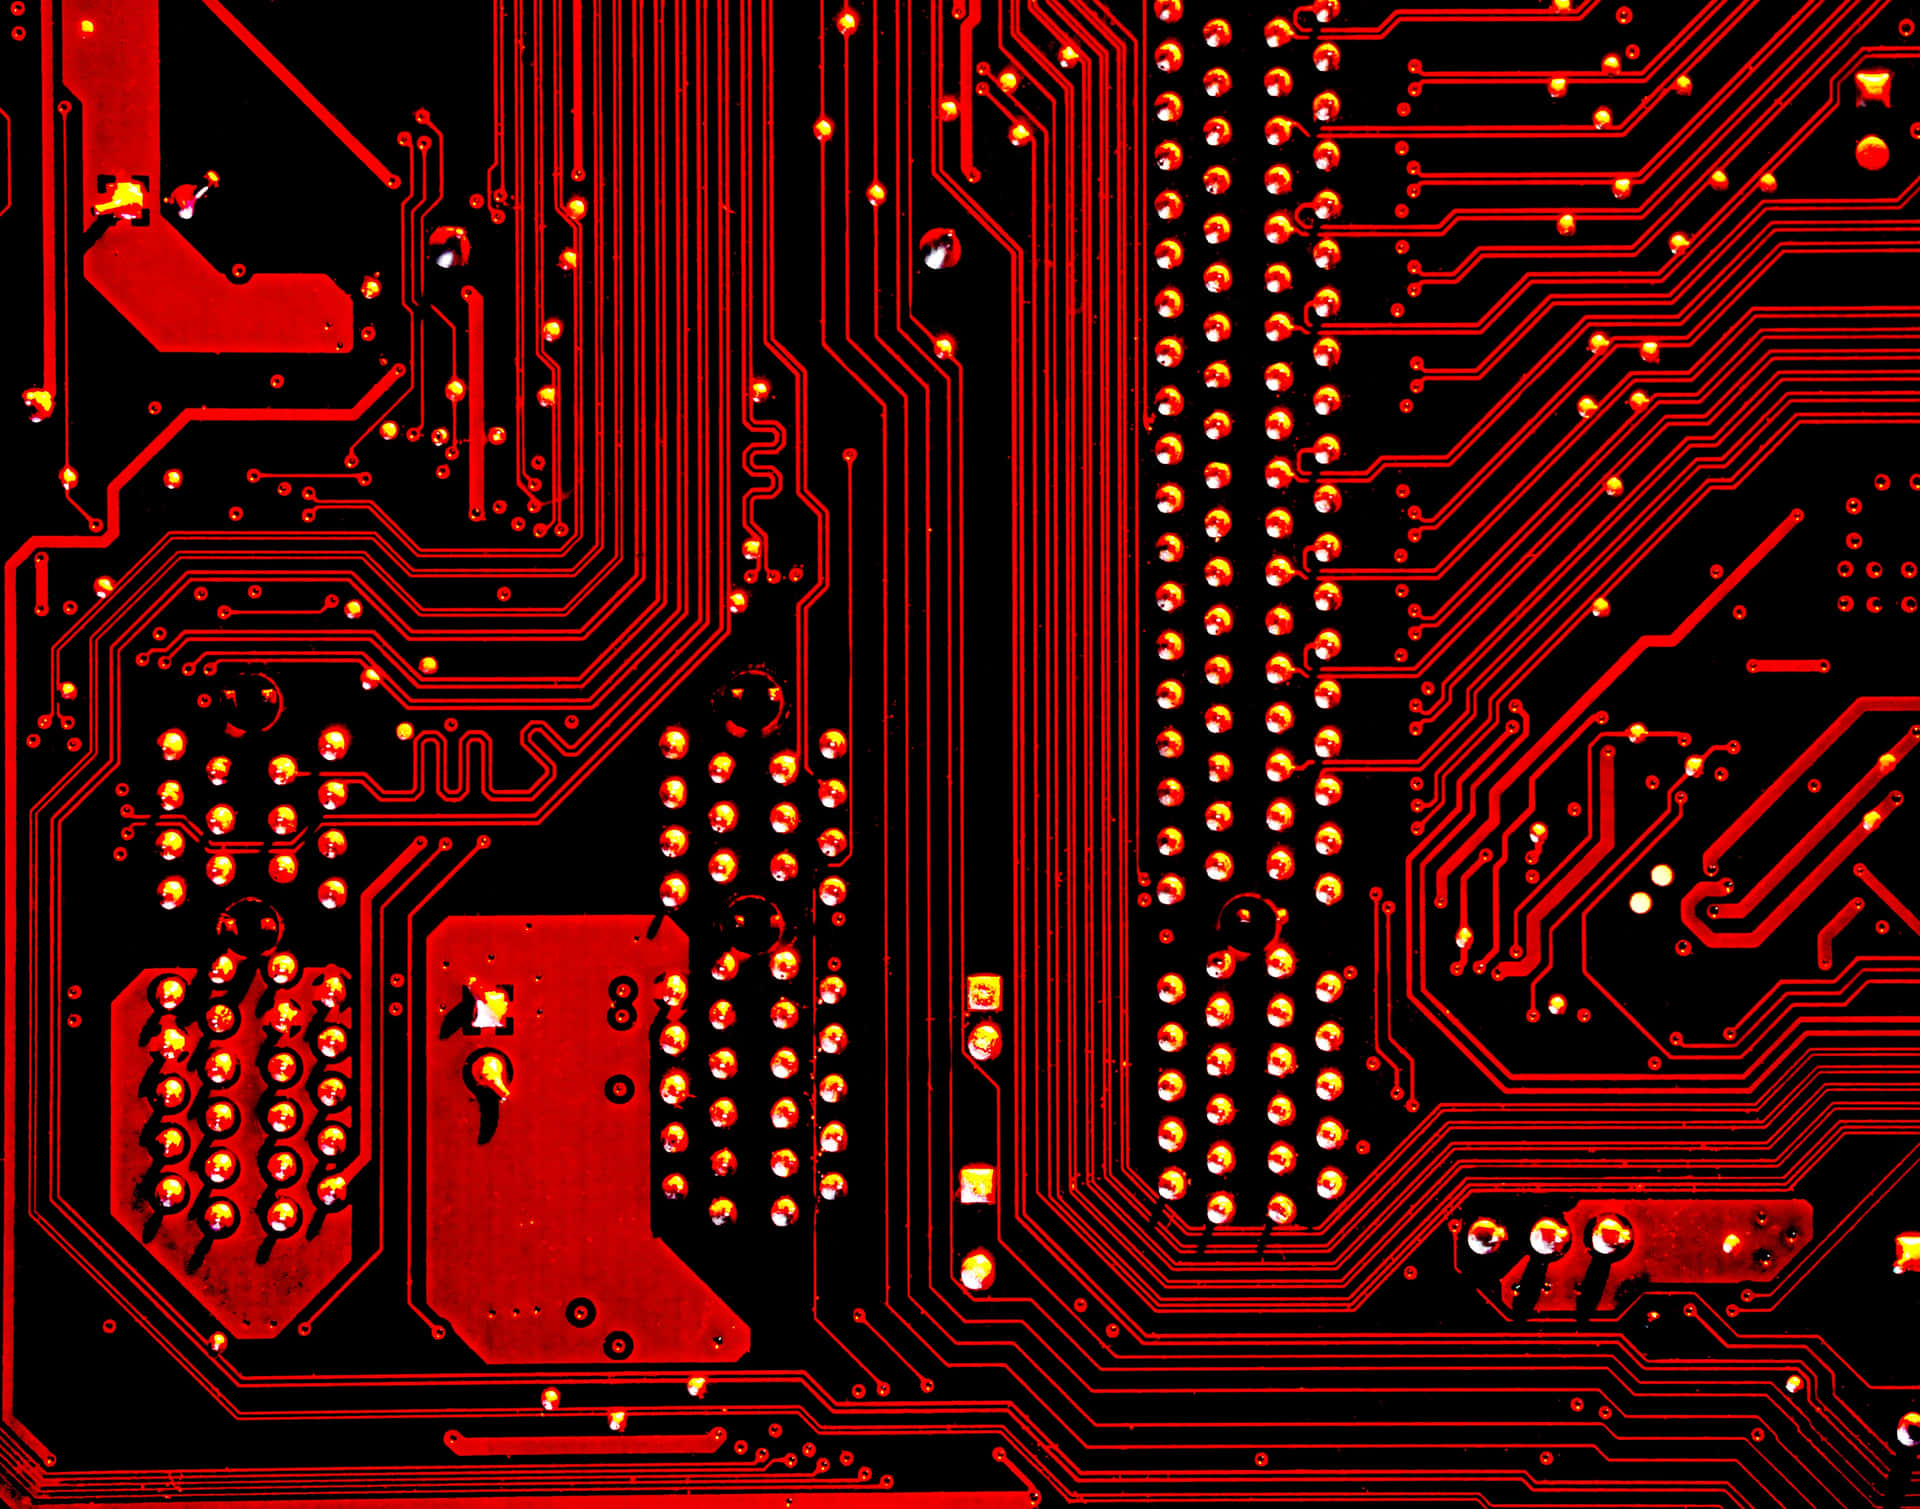 A Red Circuit Board With Red And Black Circuits